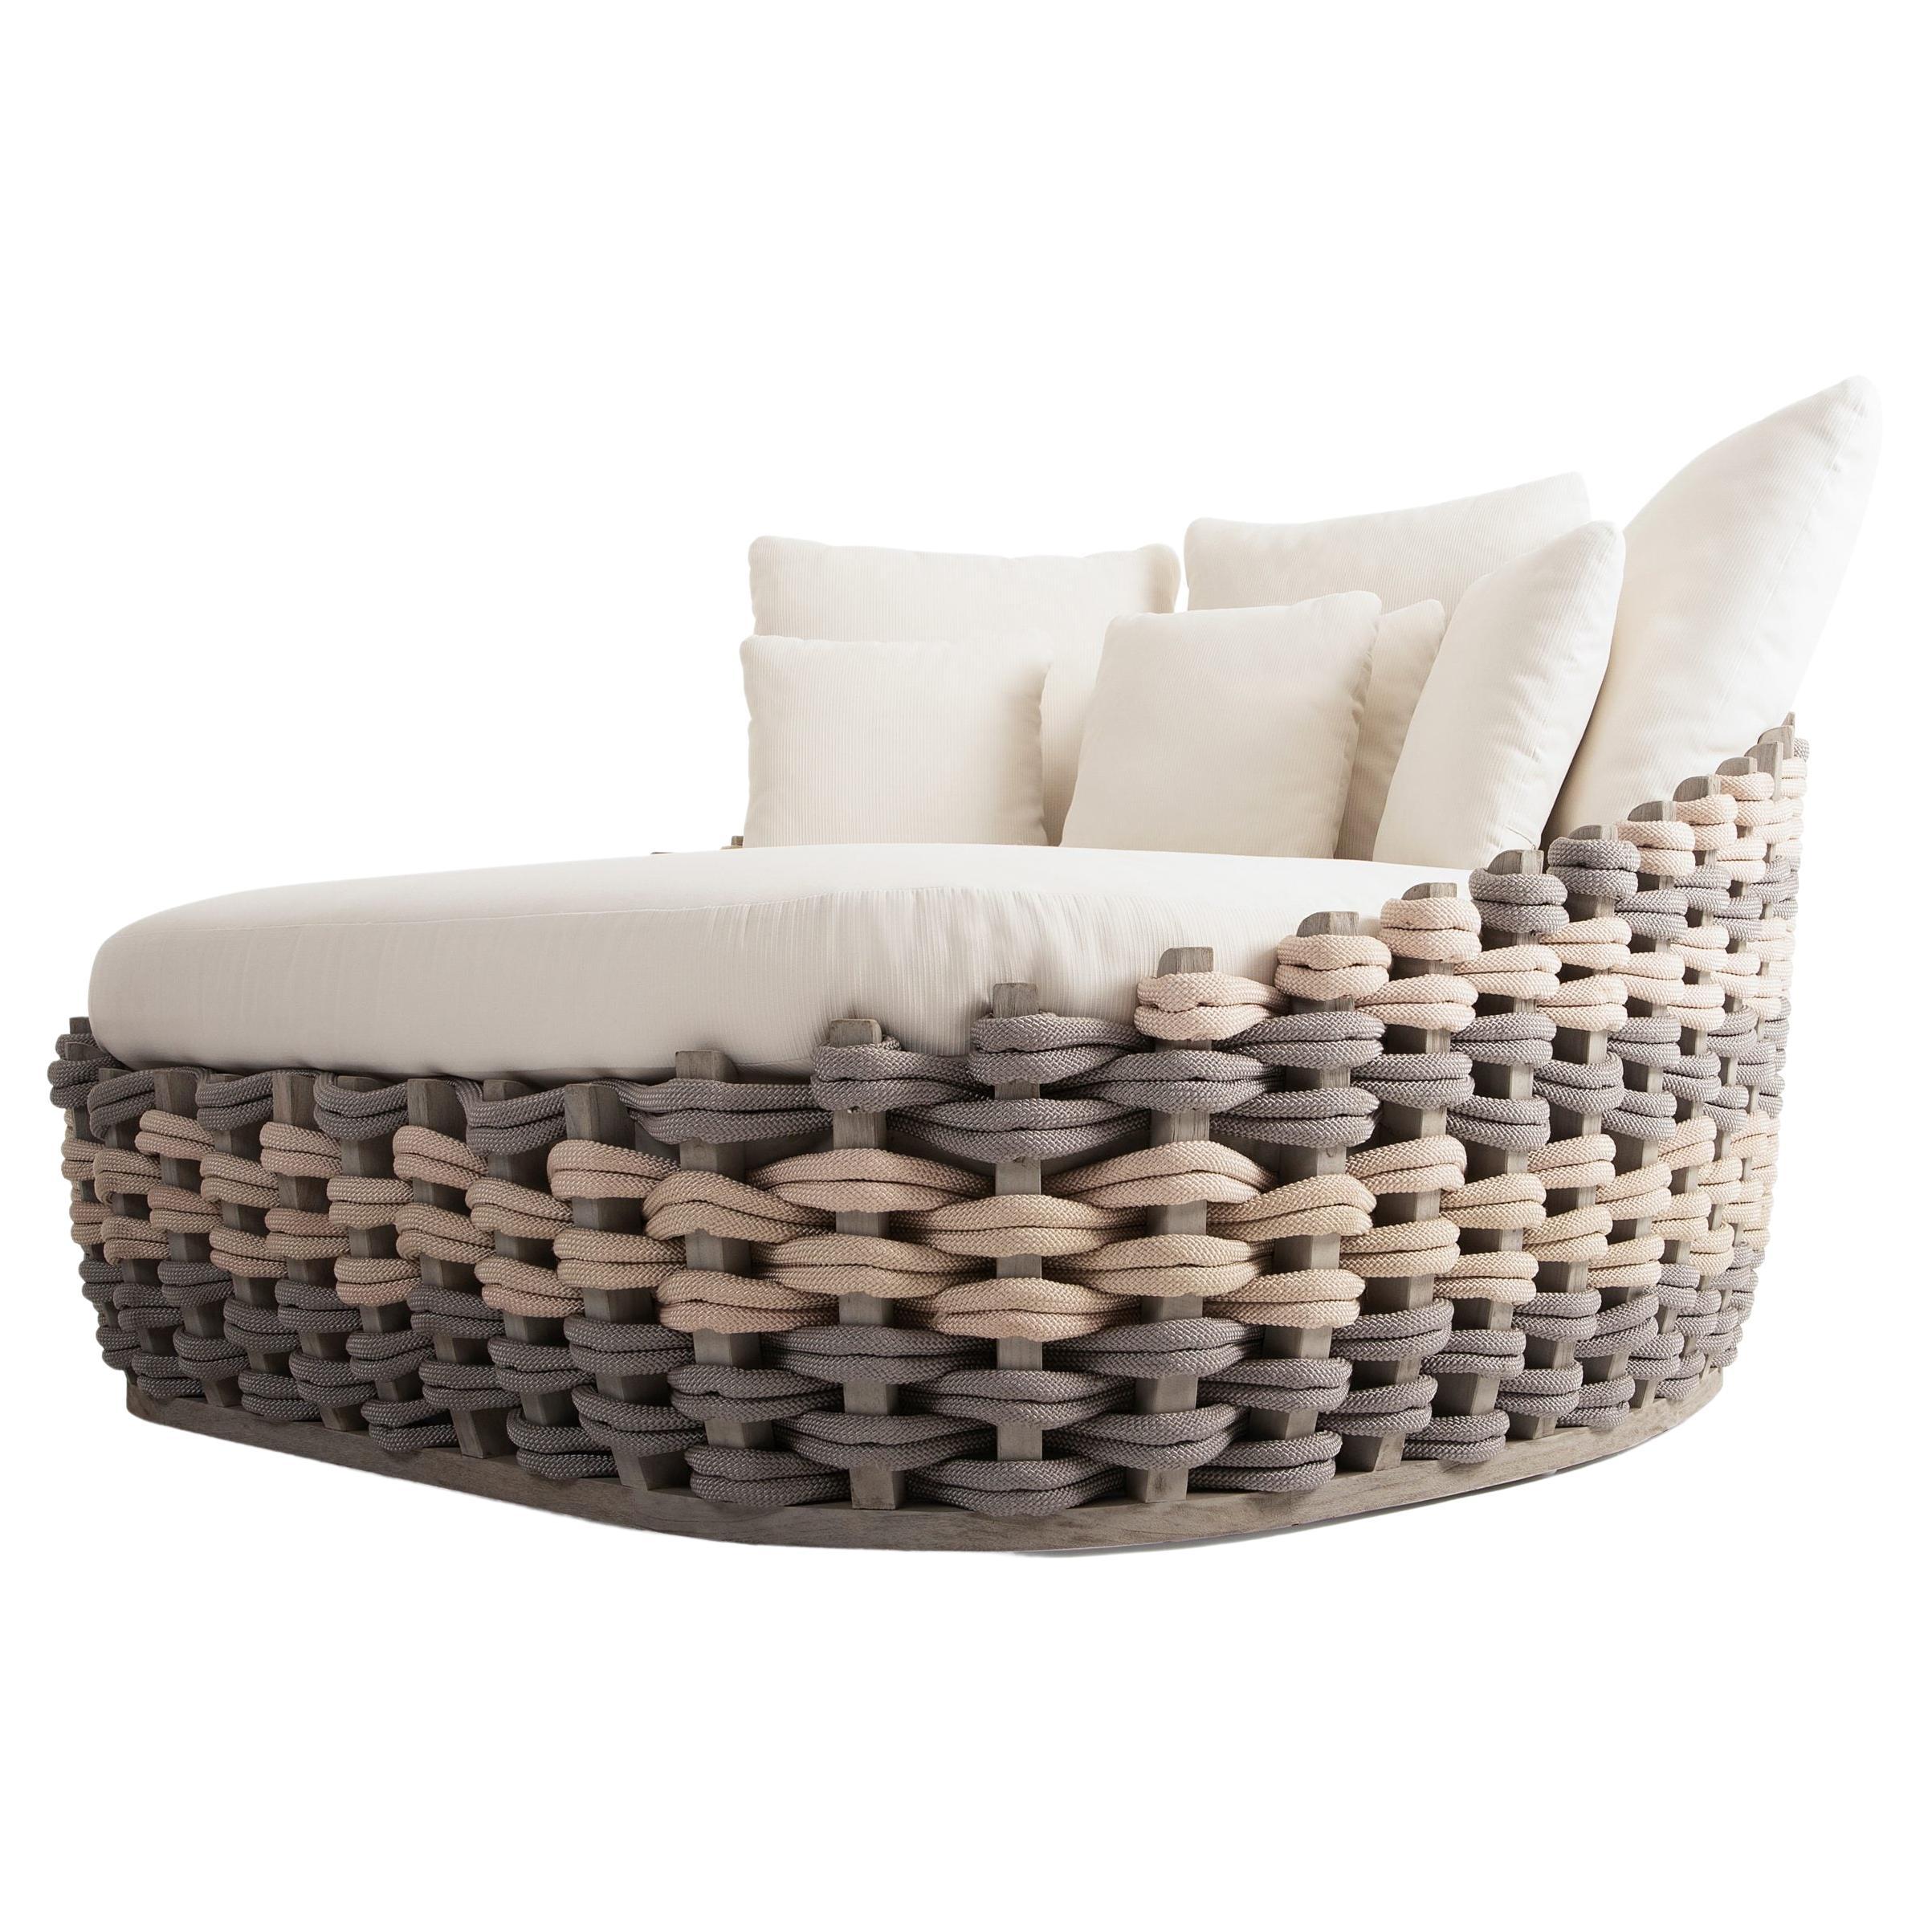 The Structure: Teak wood – Aluminum: Antioxy, heavy load, anti-scratch easy clean. Weaving Round 18mm. Fixed Upholstery 100% Polyester. High Tenacity, Low shrinkage filament yarn made of 100% polyester, easy clean.
Cushion: High quality quick dry